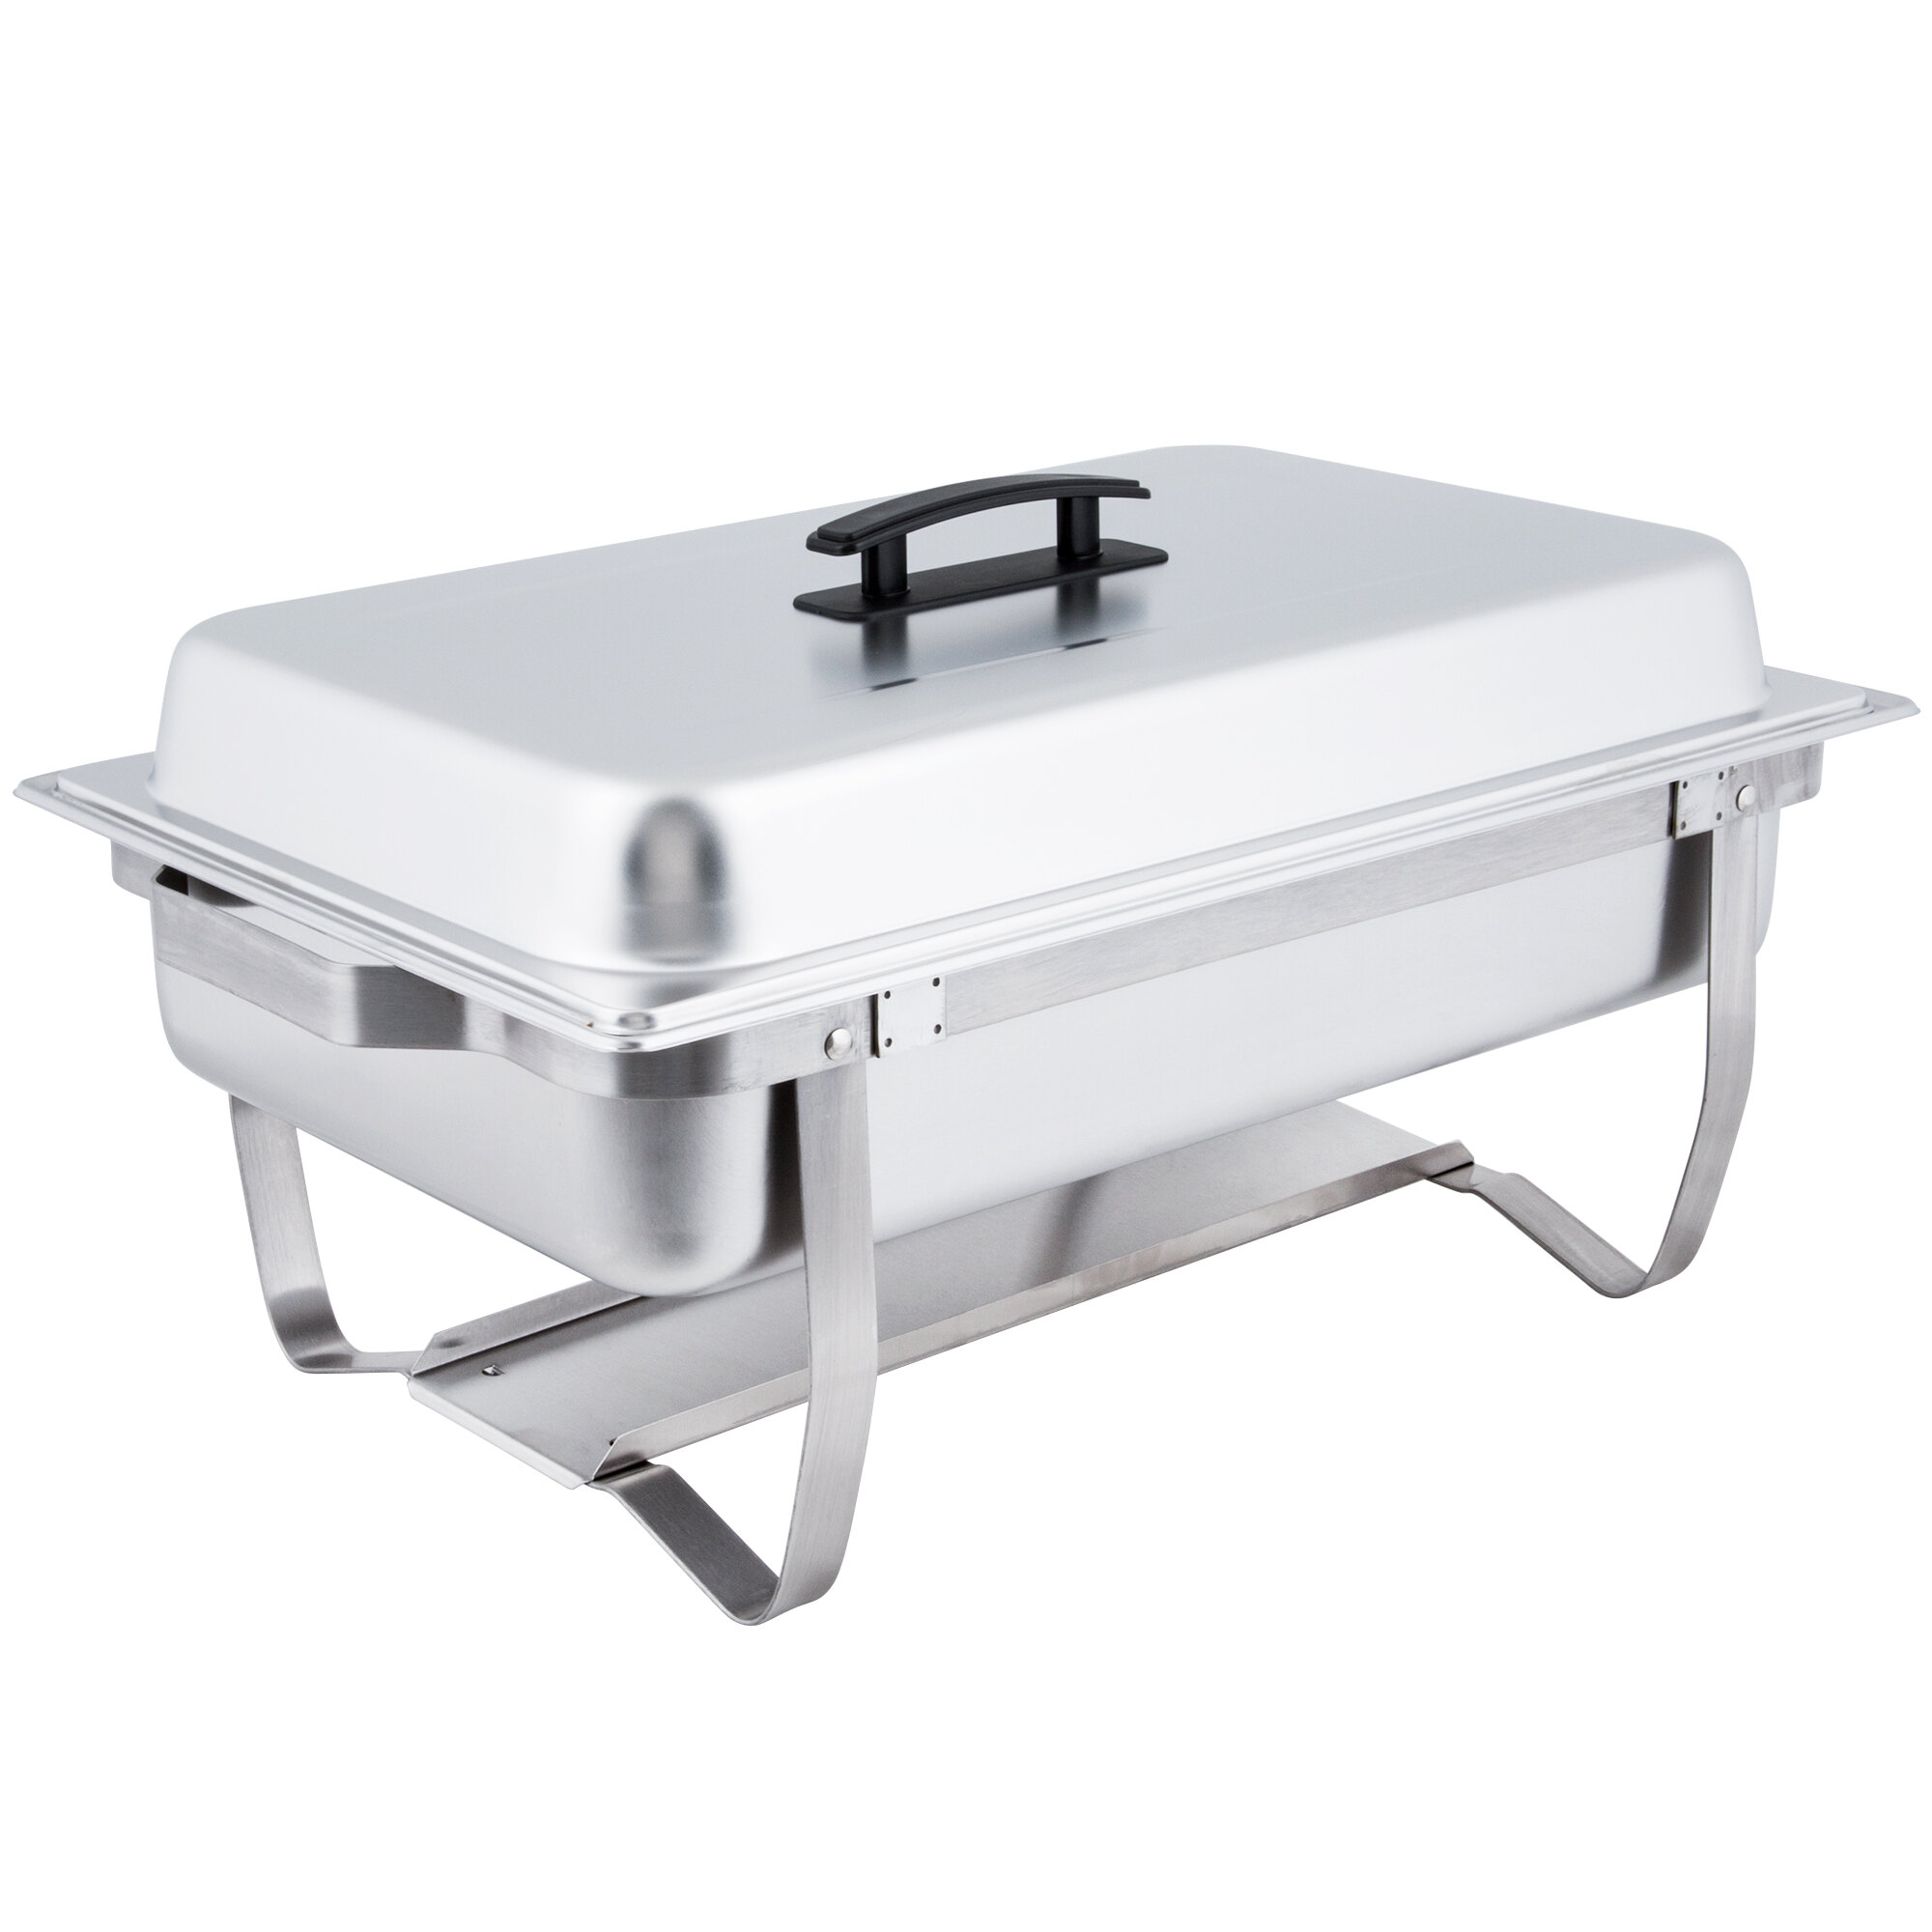 Choice 8 Qt. Stainless Steel Chafer with Folding Frame Choice Economy 8 Qt Full Size Stainless Steel Chafer